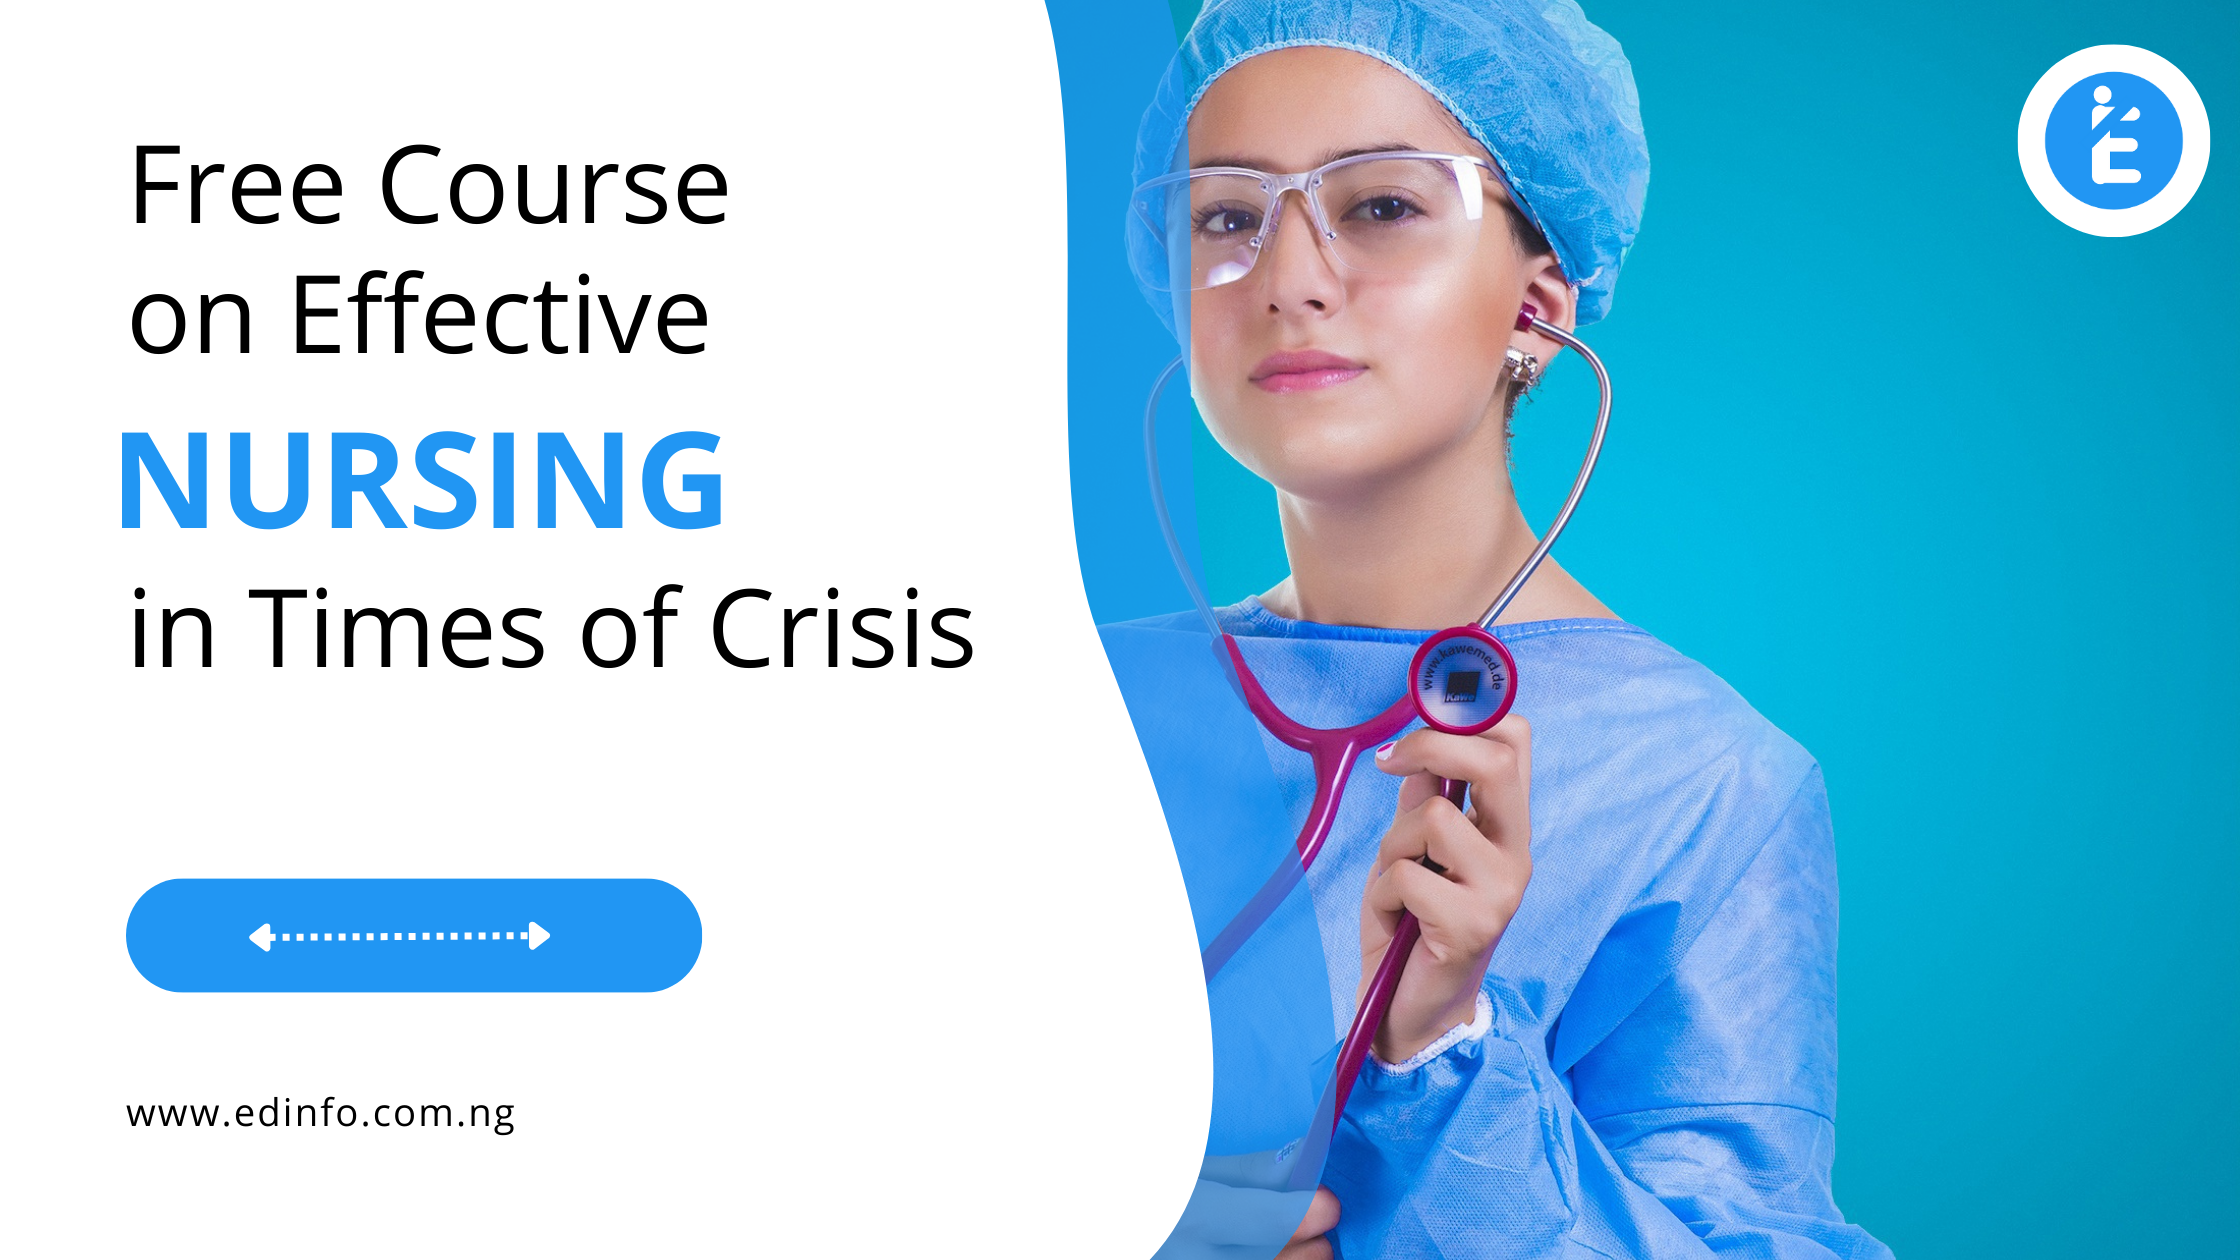 Free Course on Effective Nursing in Times of Crisis